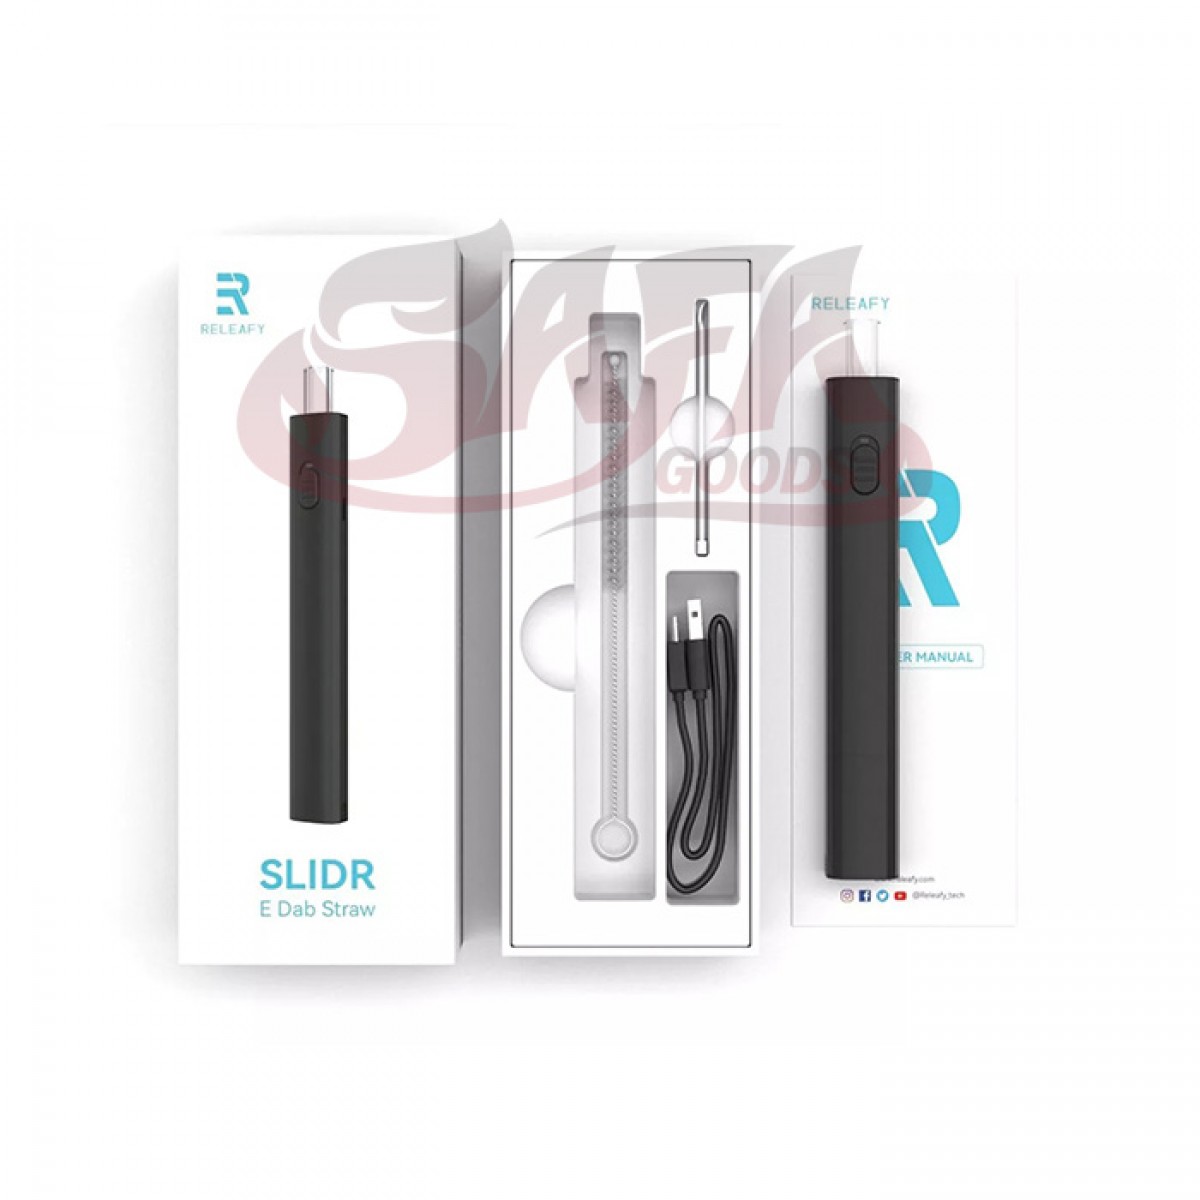 SLIDR Electronic Nectar Collector Kits